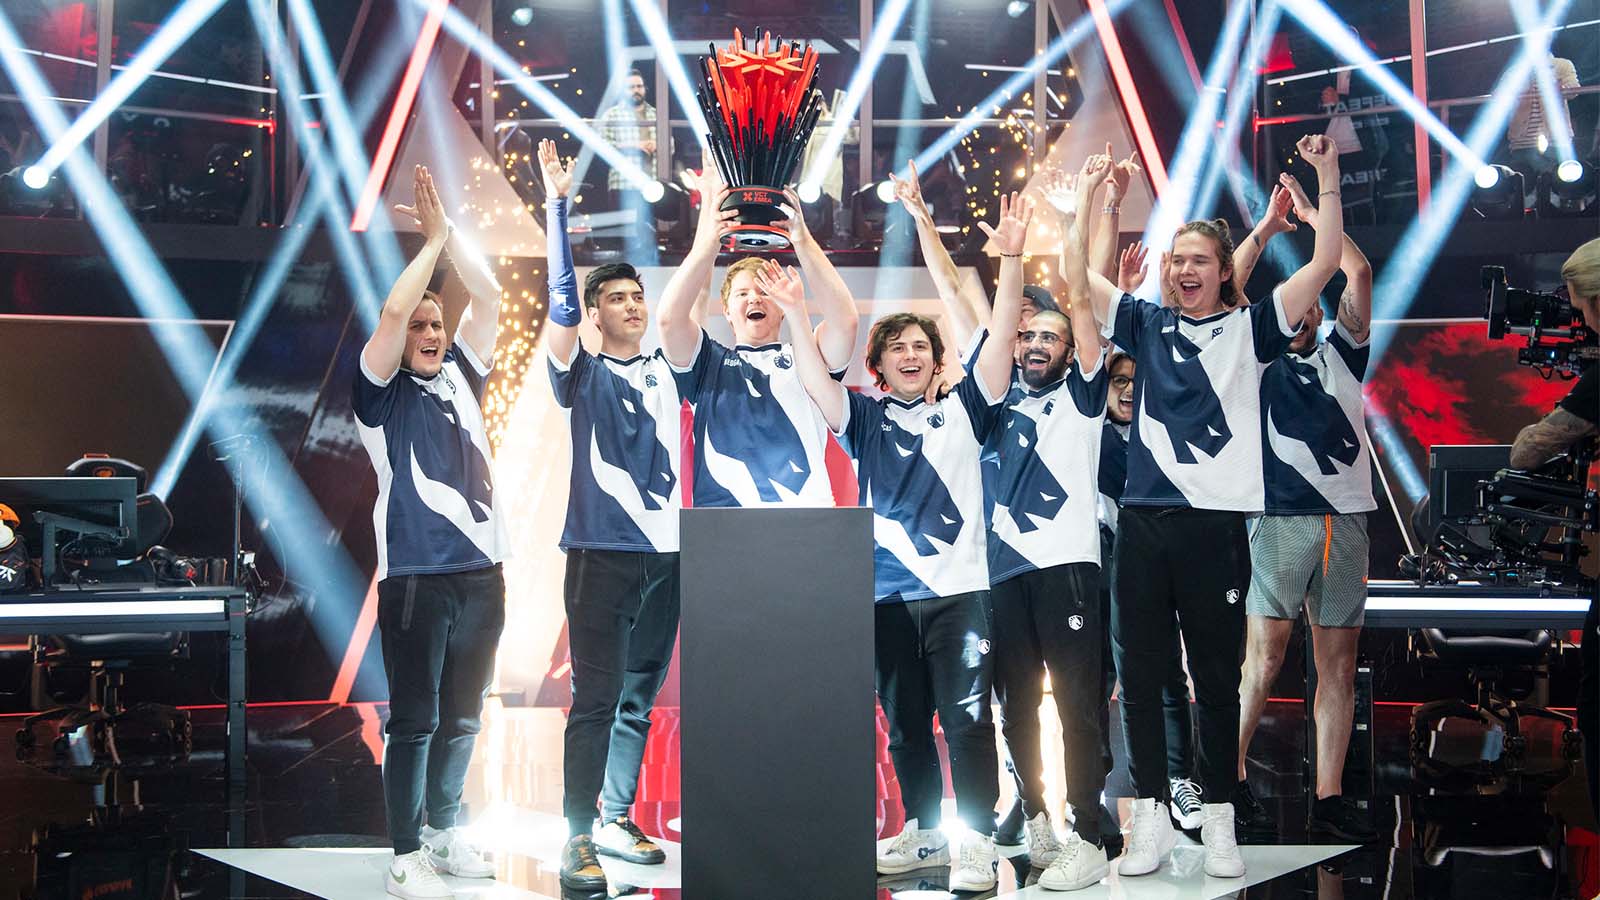 Team Liquid wins VCT EMEA championship with surprise victory over VCT LOCK//IN champs - ONE Esports